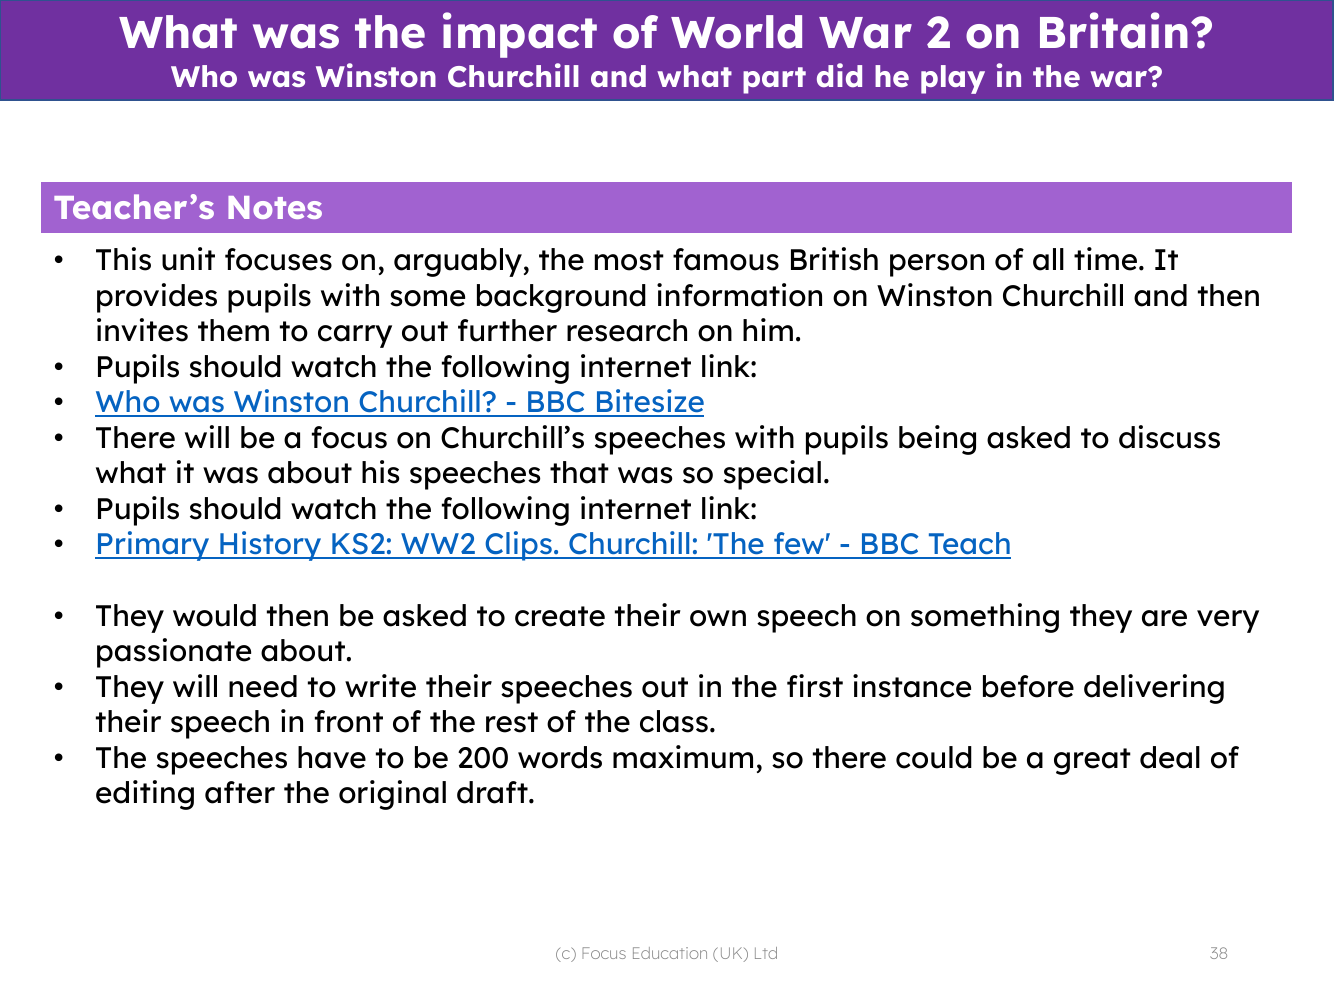 Who was Winston Churchill and what part did he play in the war? - Teacher notes